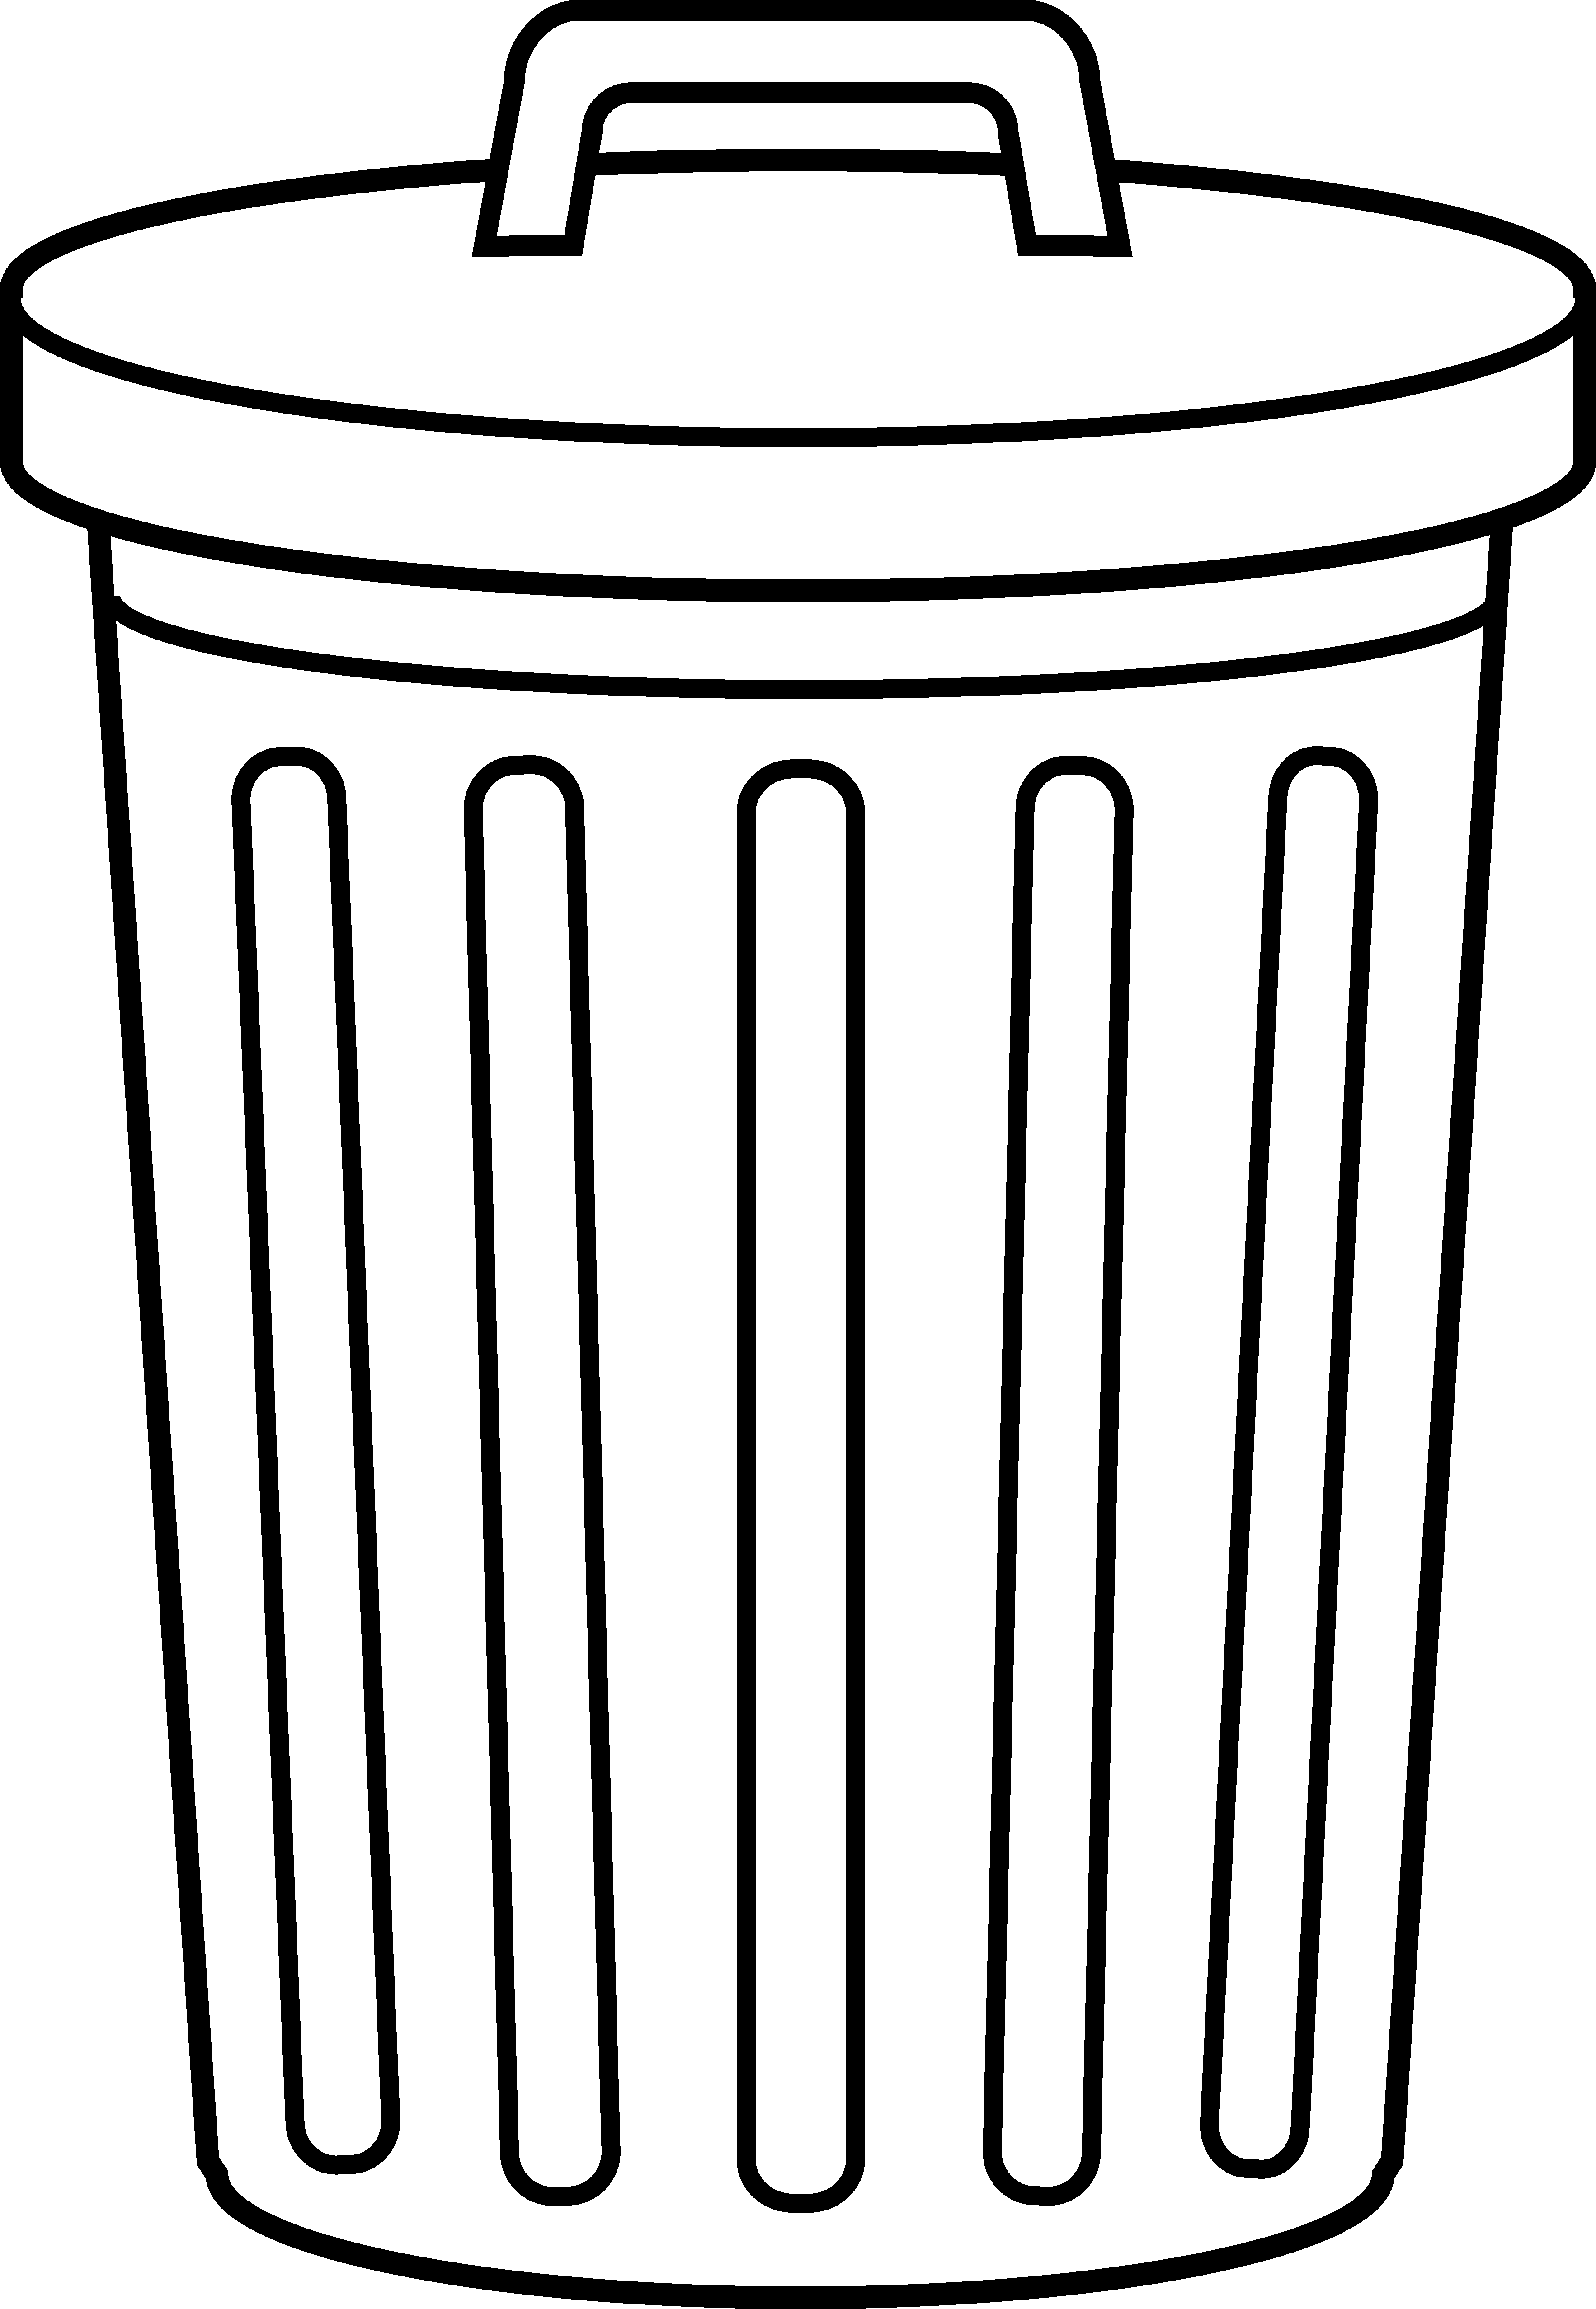 Garbage Can Line Art - Free Clip Art